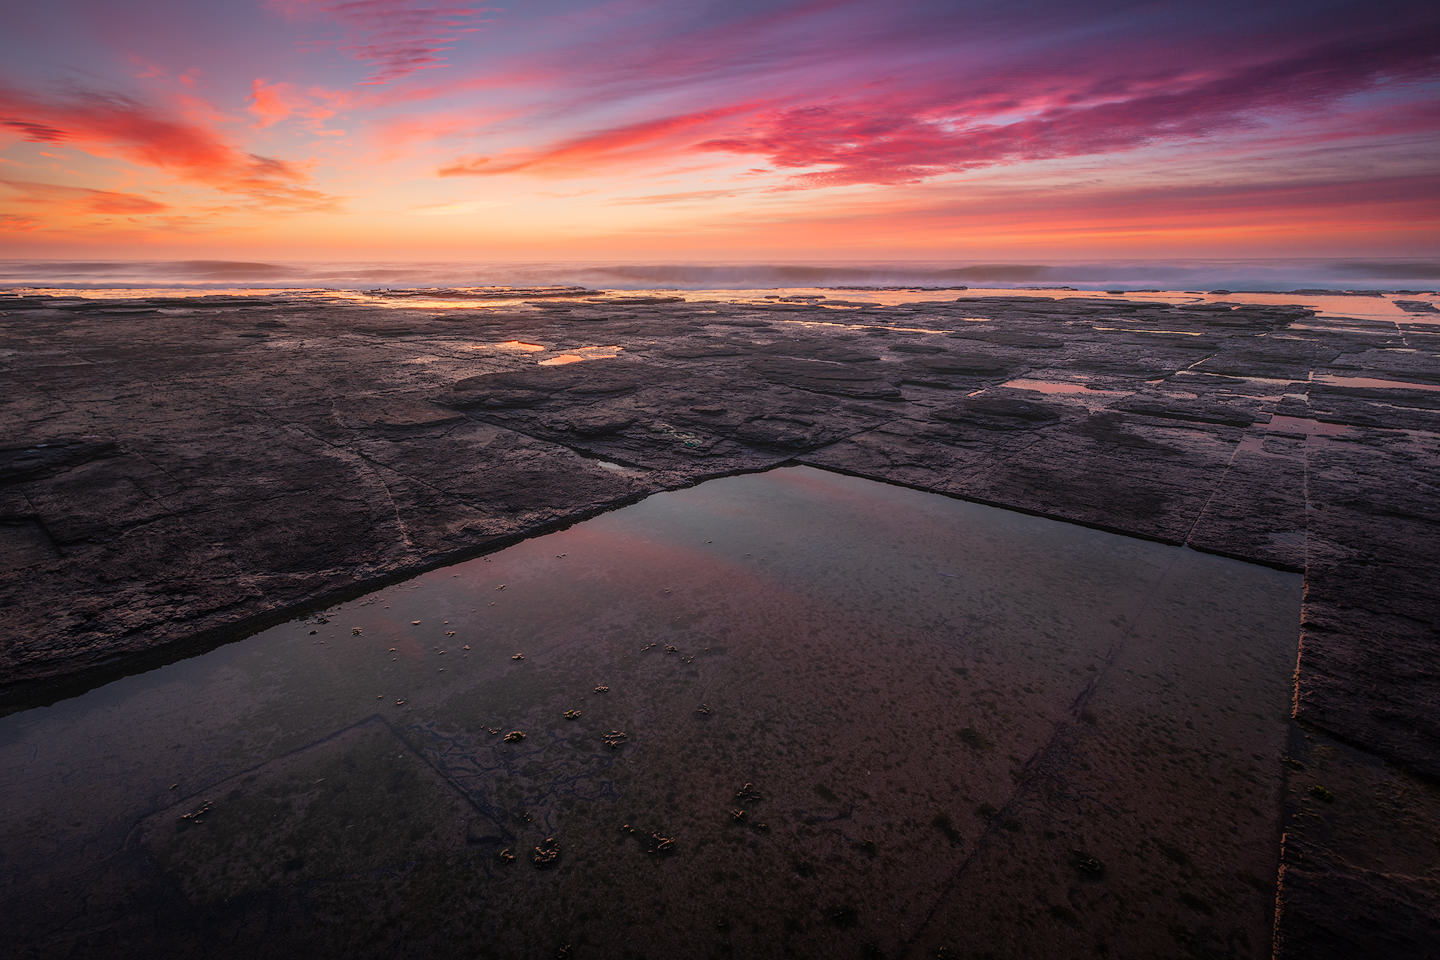 Colourful sunrise over geometric tidepool formations on the coast of South Africa